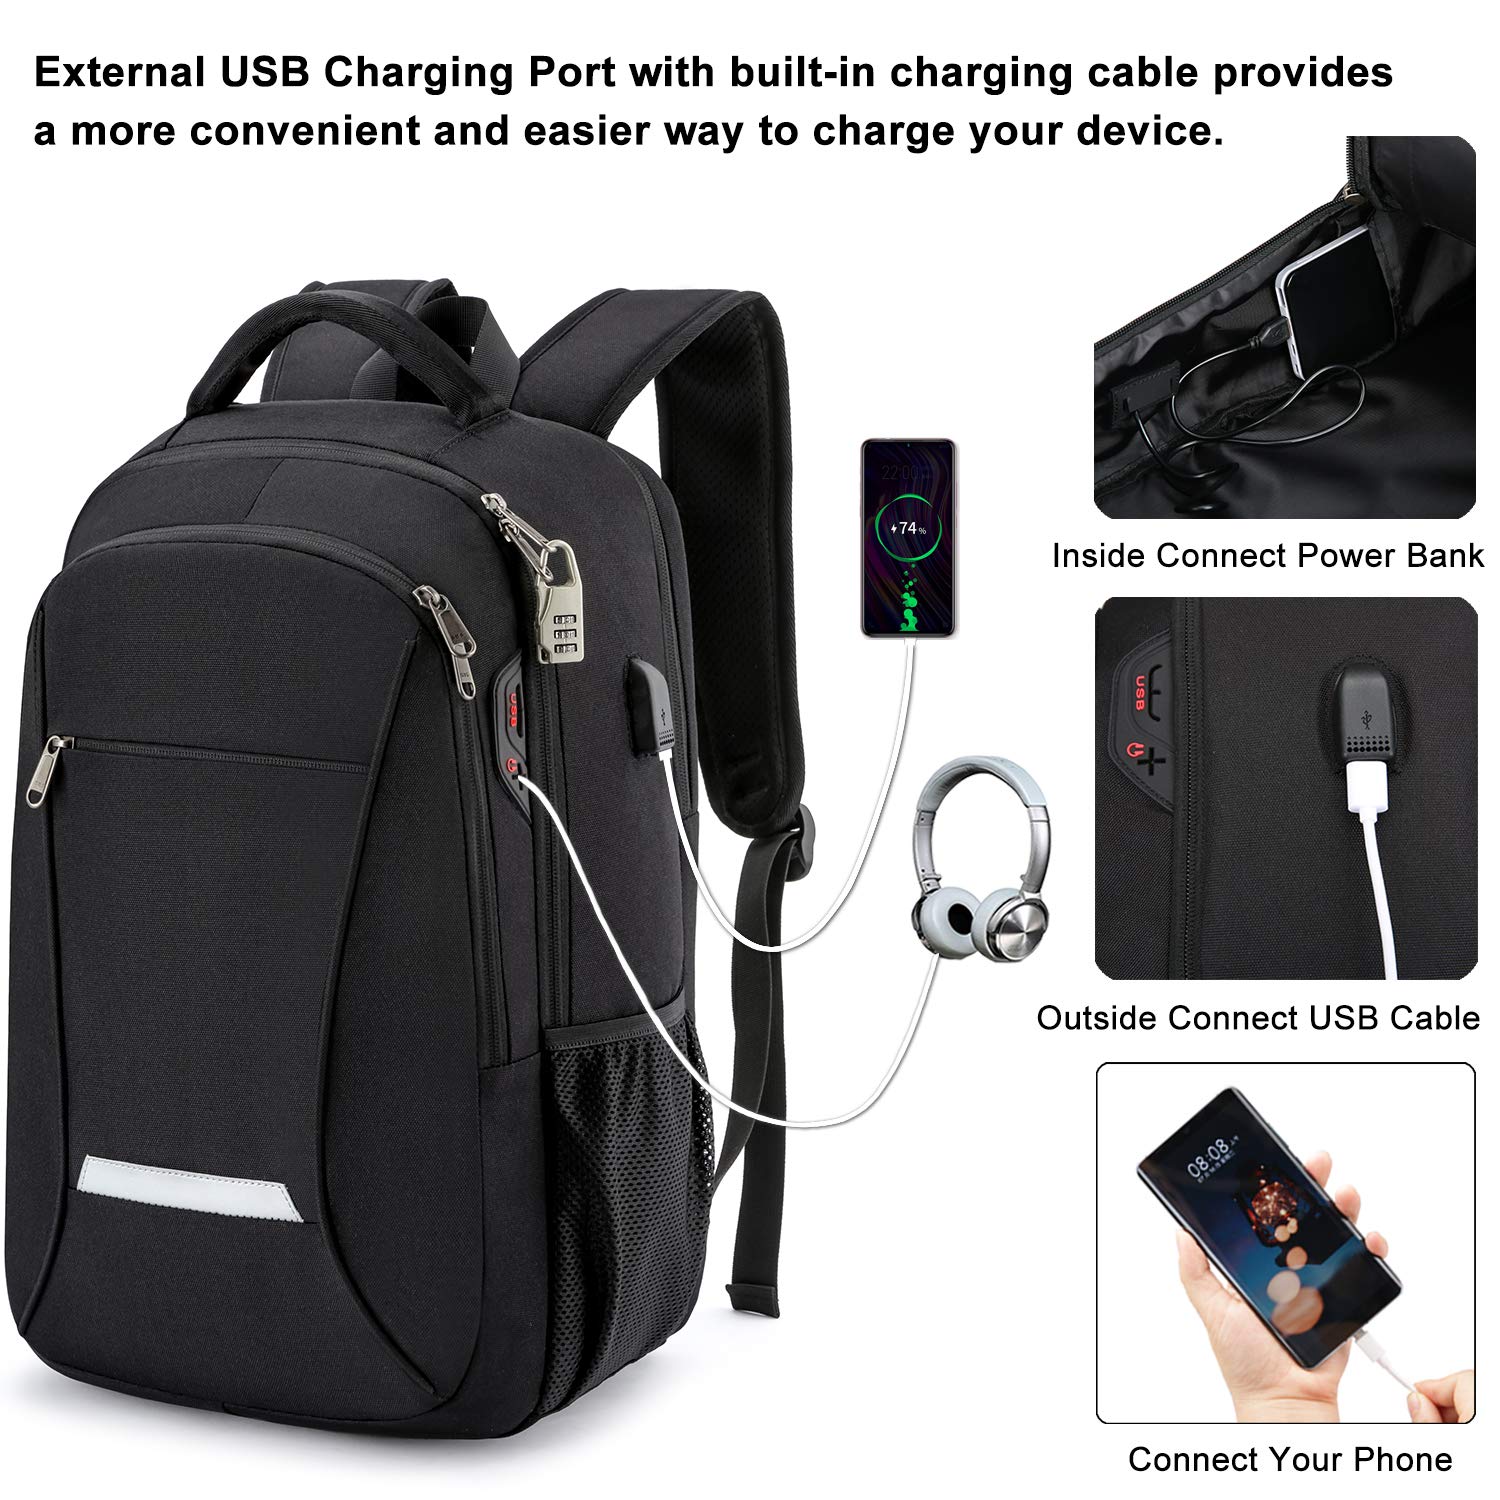 XQXA Travel Laptop Backpack, Business Backpack Anti-Theft with USB Charging Port and Password Lock, Durable Water Resistant Computer Bag Fit 15.6 Inch Laptops for Men Women Gift